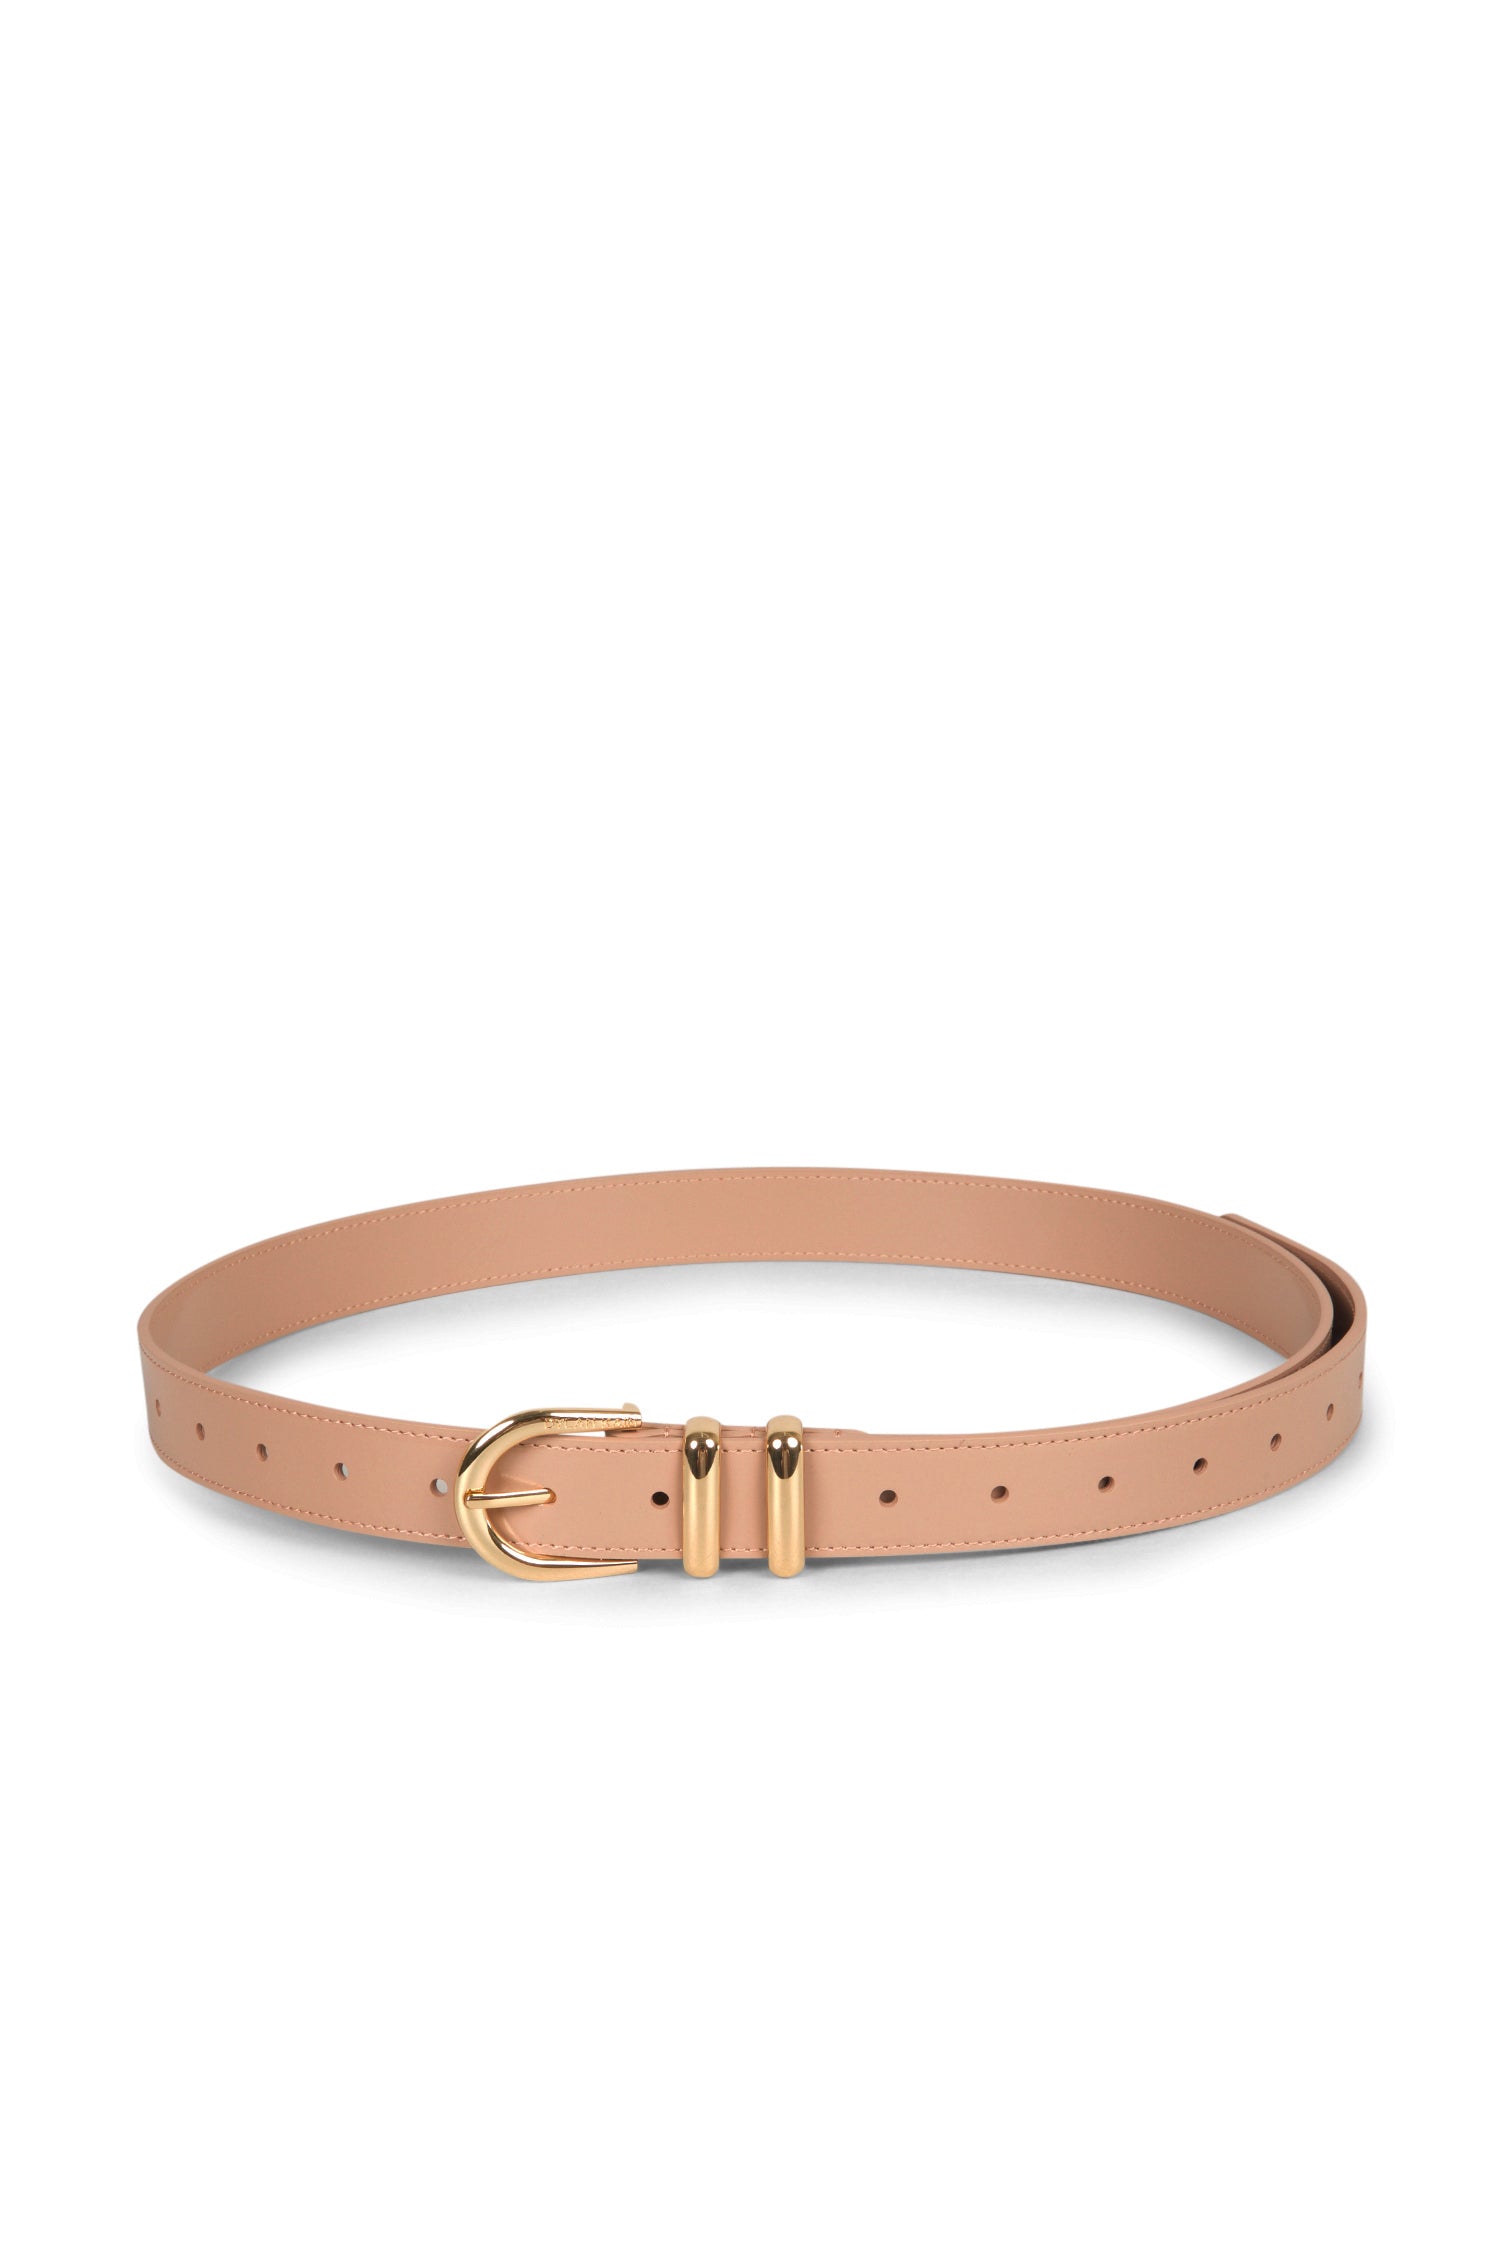 The Tia Patent Belt Fawn - Gift Edit